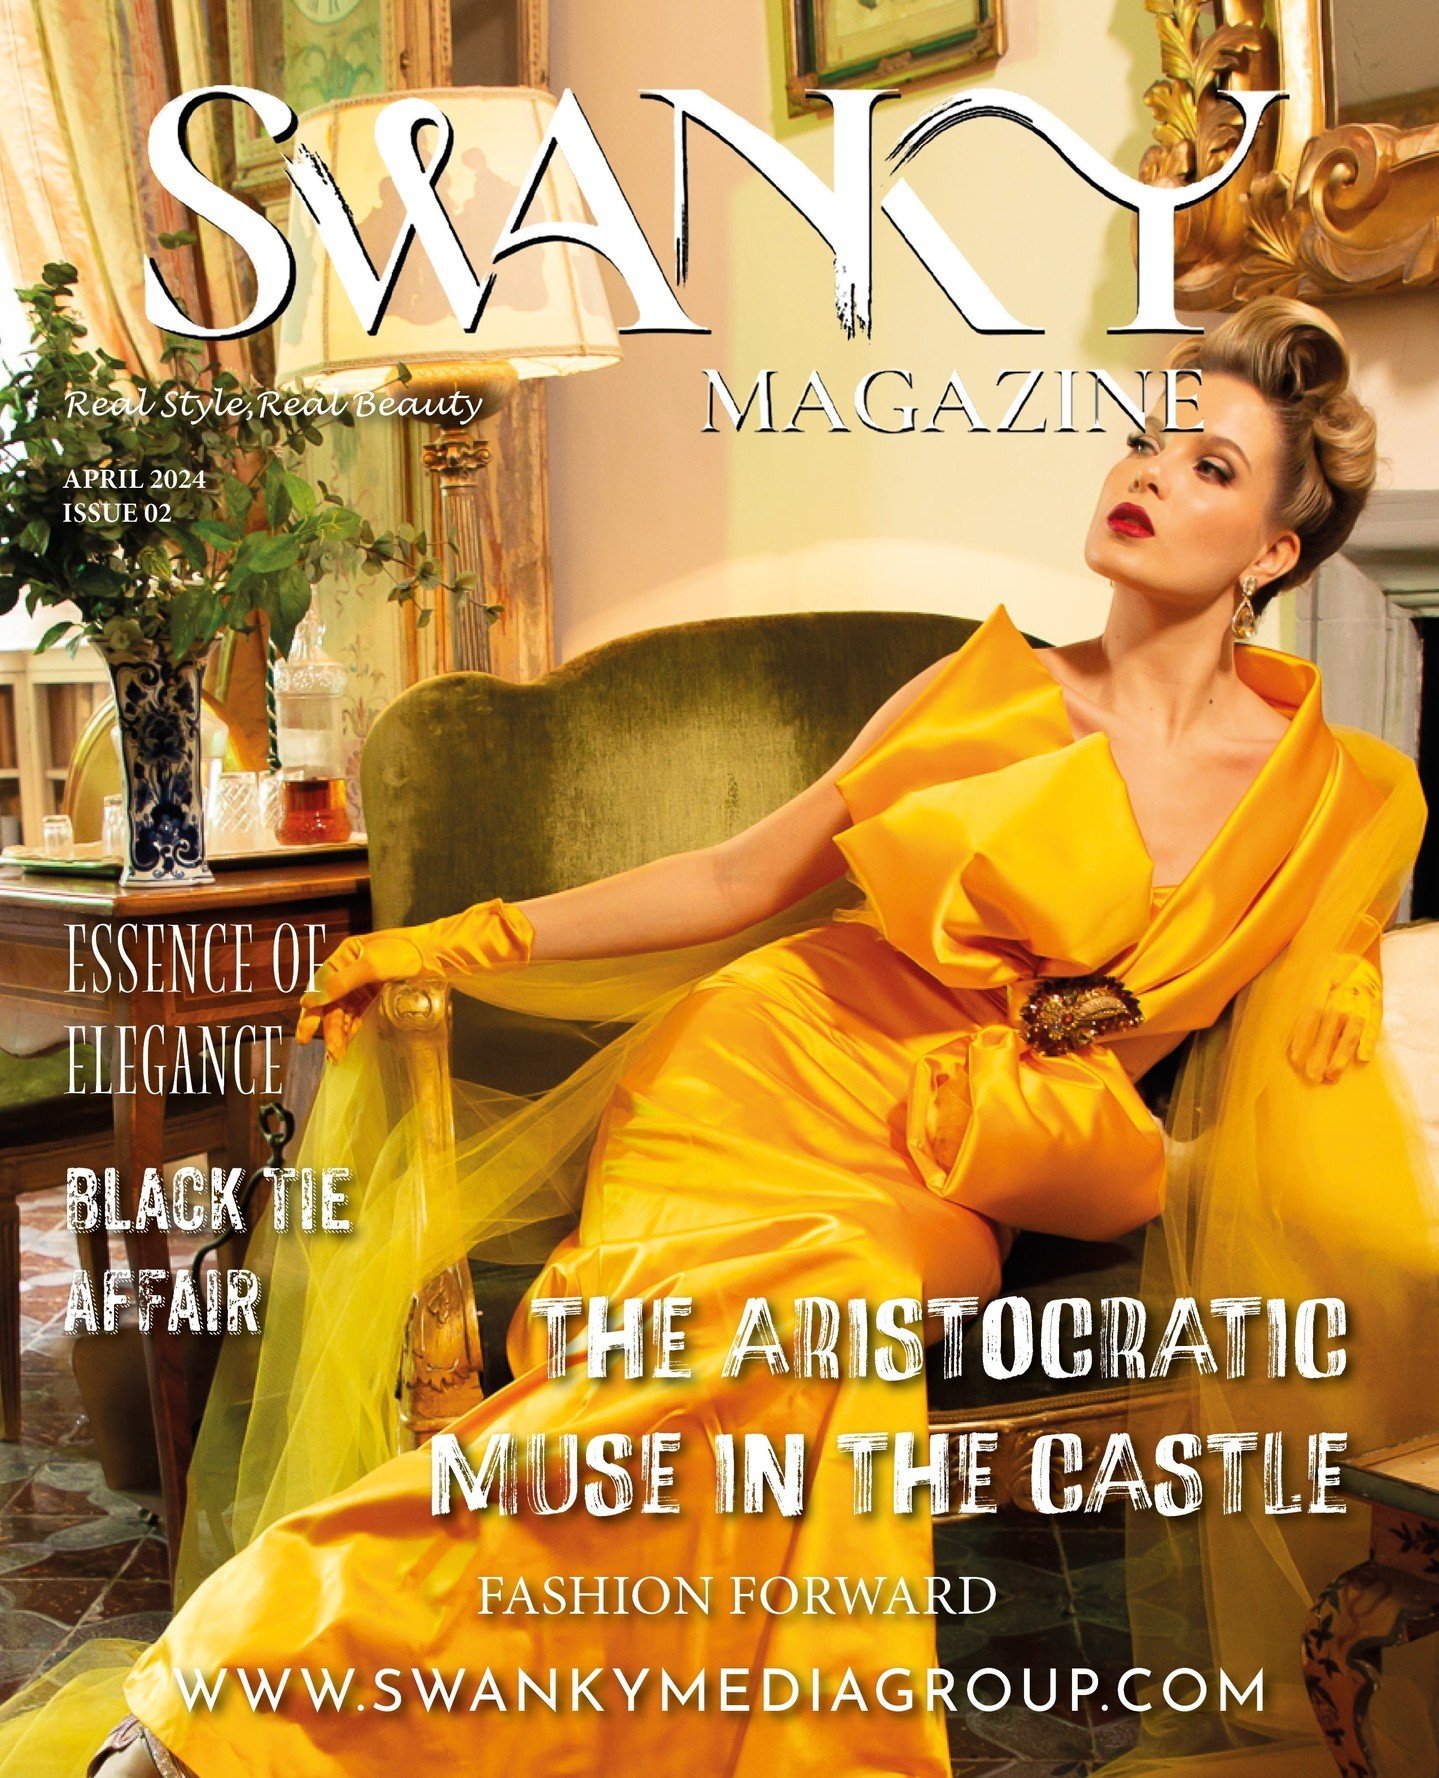 OUR APRIL ISSUES HAVE ARRIVED 💛⁠
⁠
Swanky Hollywood Magazine - April 2024: The Hollywood Edition Issue 02⁠
⁠
👆🏼 Grab your copy from our store via the link in our bio⁠!⁠
⁠
'The Aristocratic Muse'⁠
⁠
Photographer: Luigi D'Arcanelo⁠
Makeup Artist: El